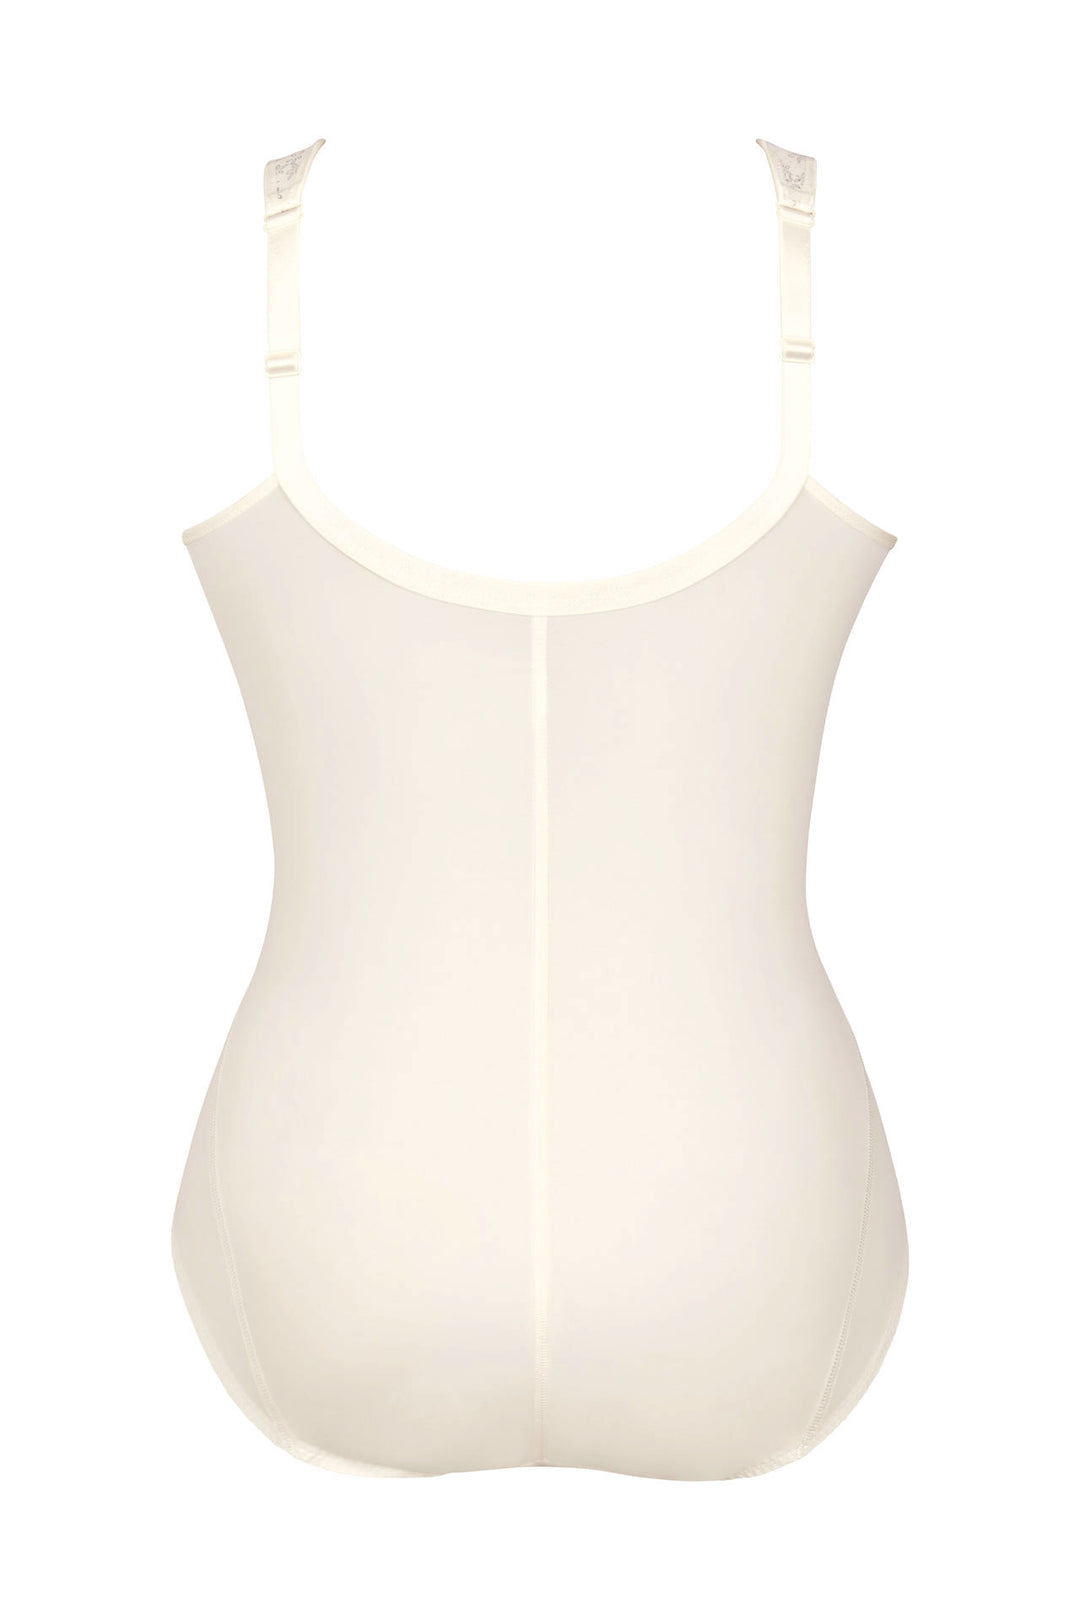 Top-selling reducing body without underwire Clara Art 